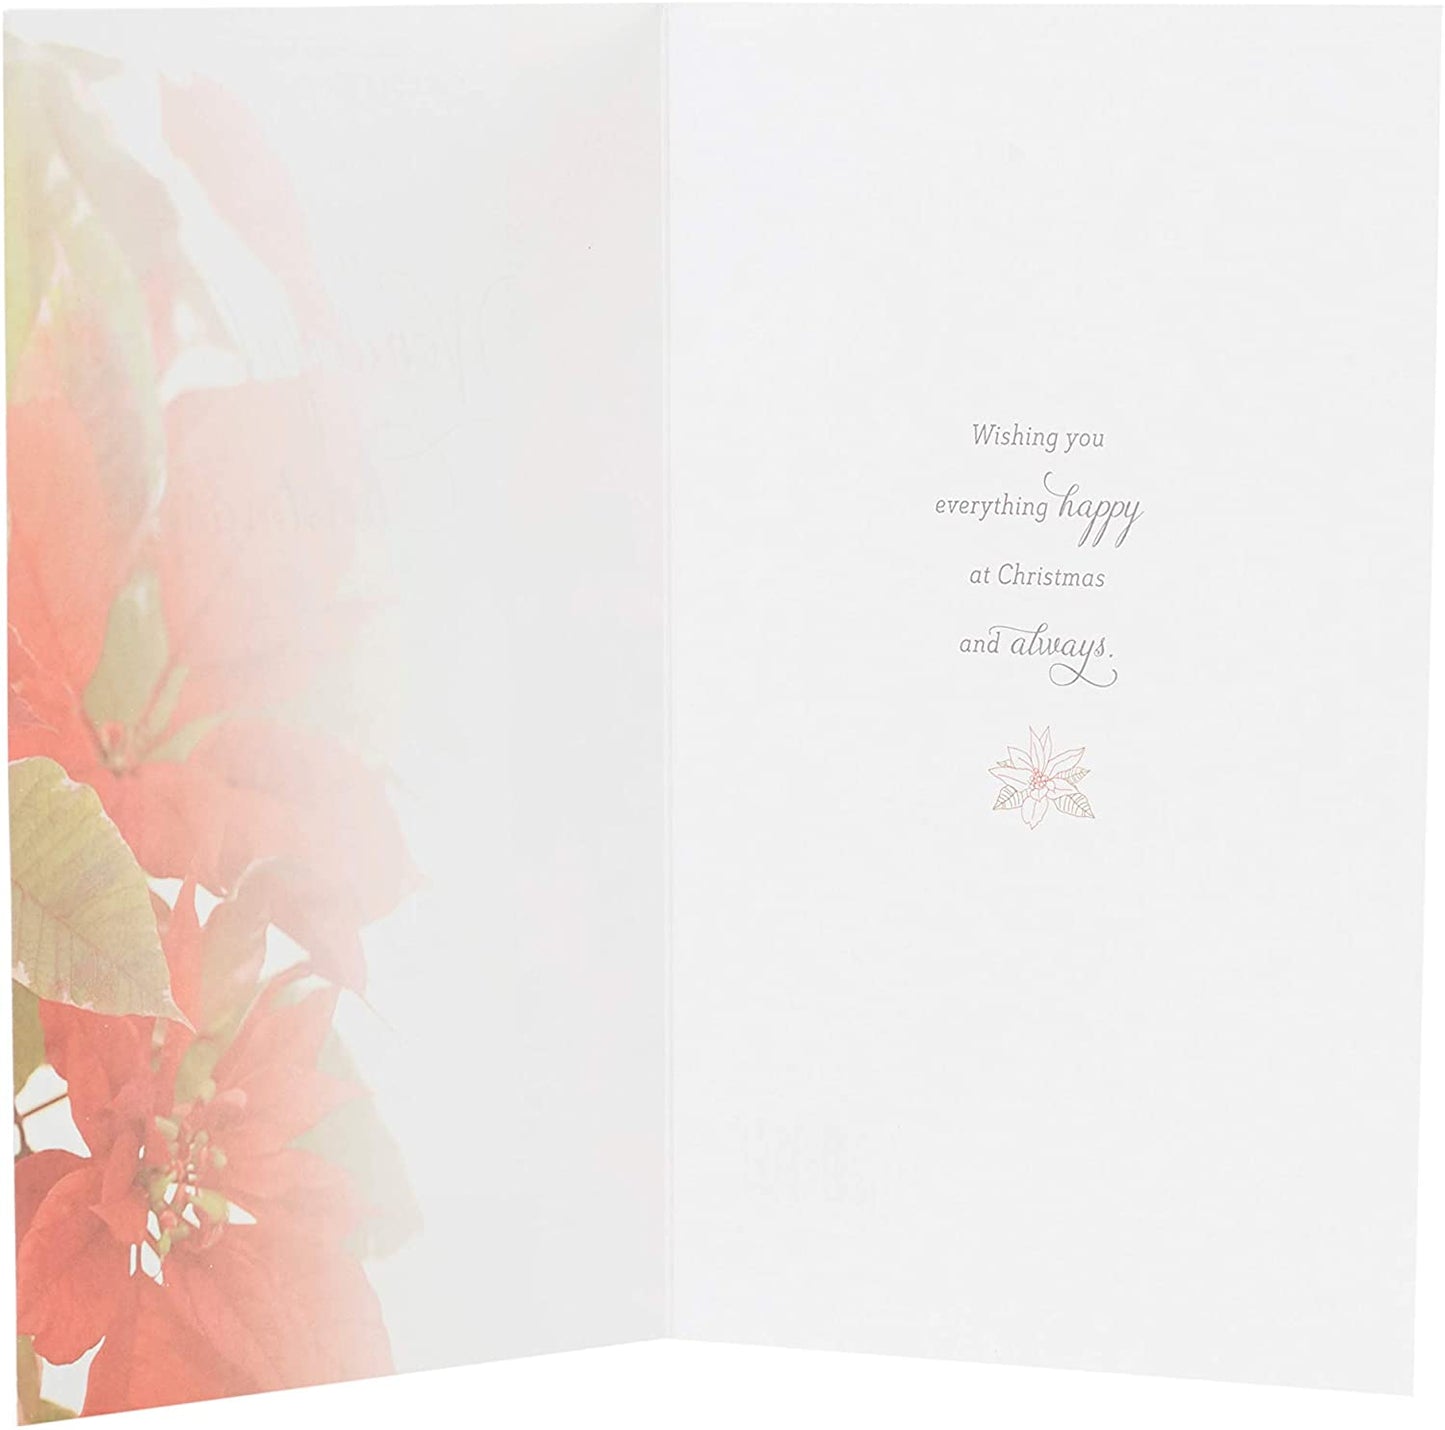 Wishing Someone Special Floral Design Foil Finished Christmas Card